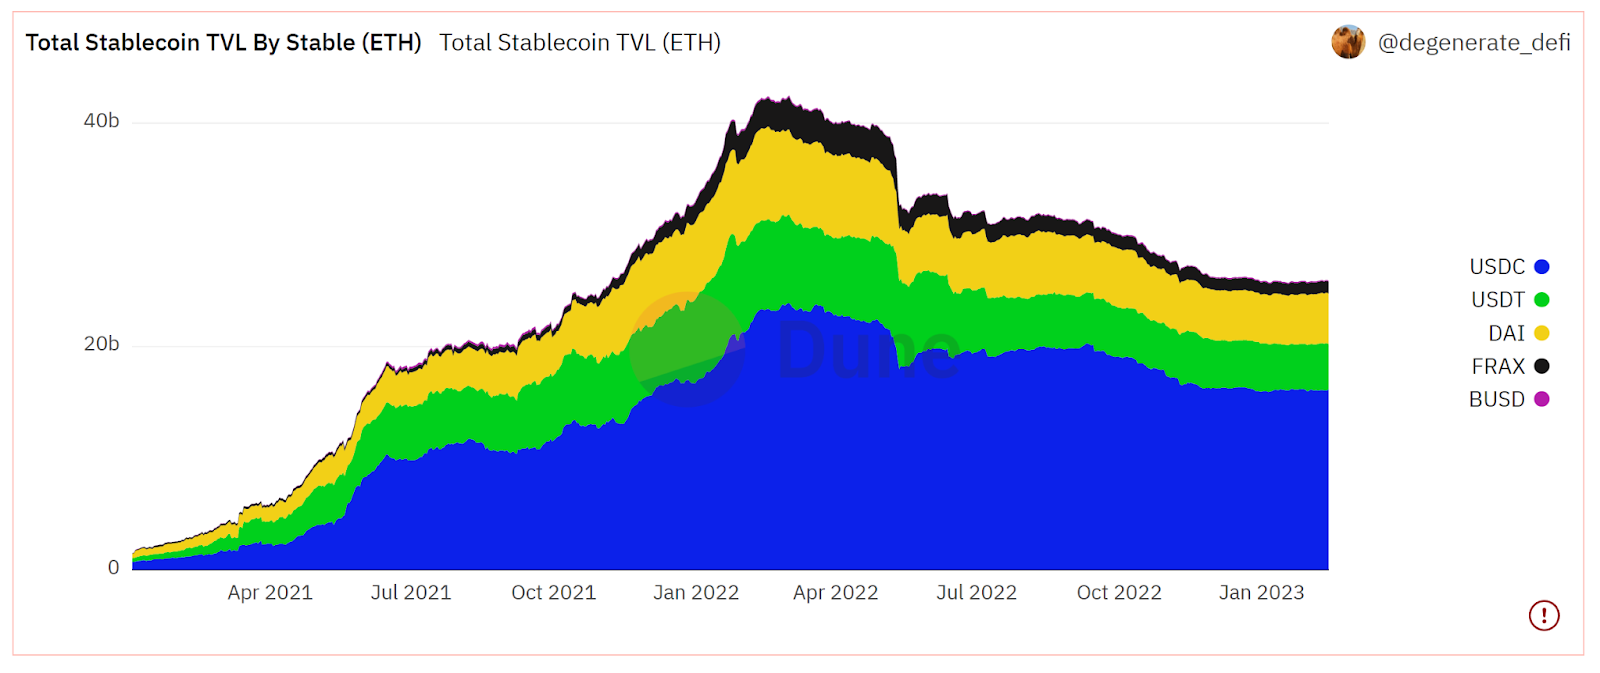 total stablecoin tvl oleh stable eth